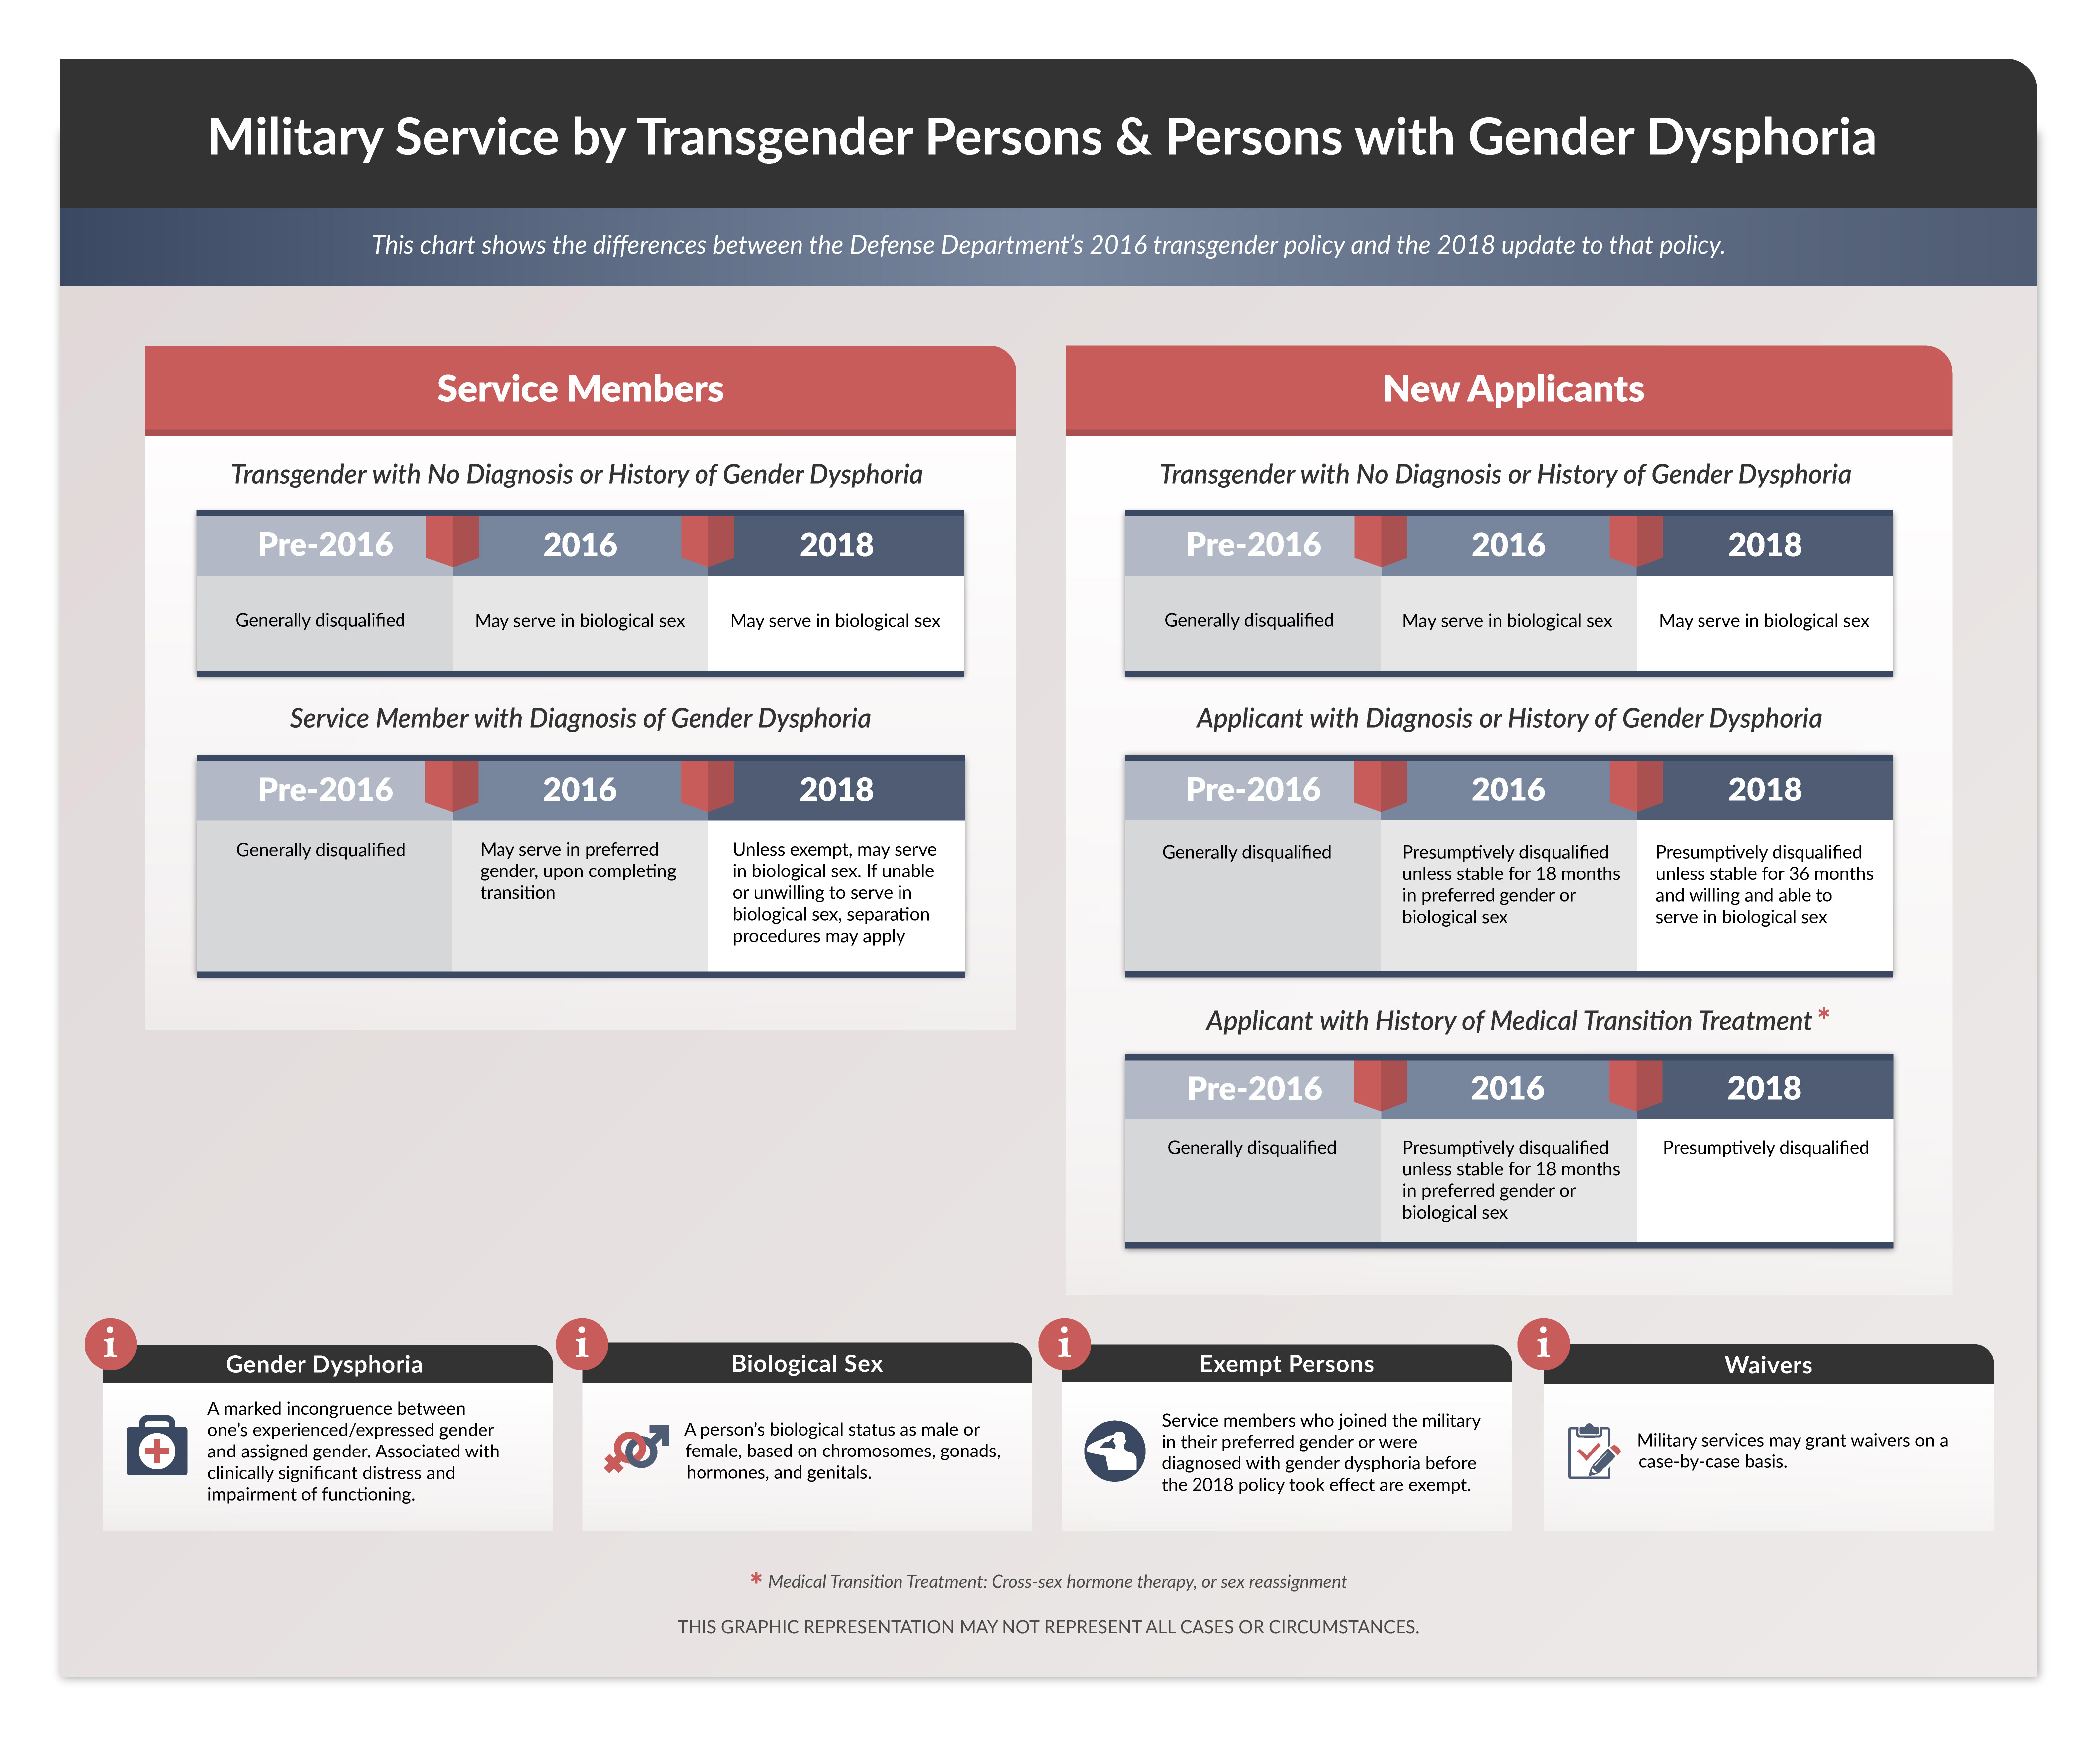 M2f Tg Captions Forced Sex - 5 Things to Know About DOD's New Policy on Military Service by Transgender  Persons and Persons With Gender Dysphoria > U.S. Department of Defense >  Defense Department News